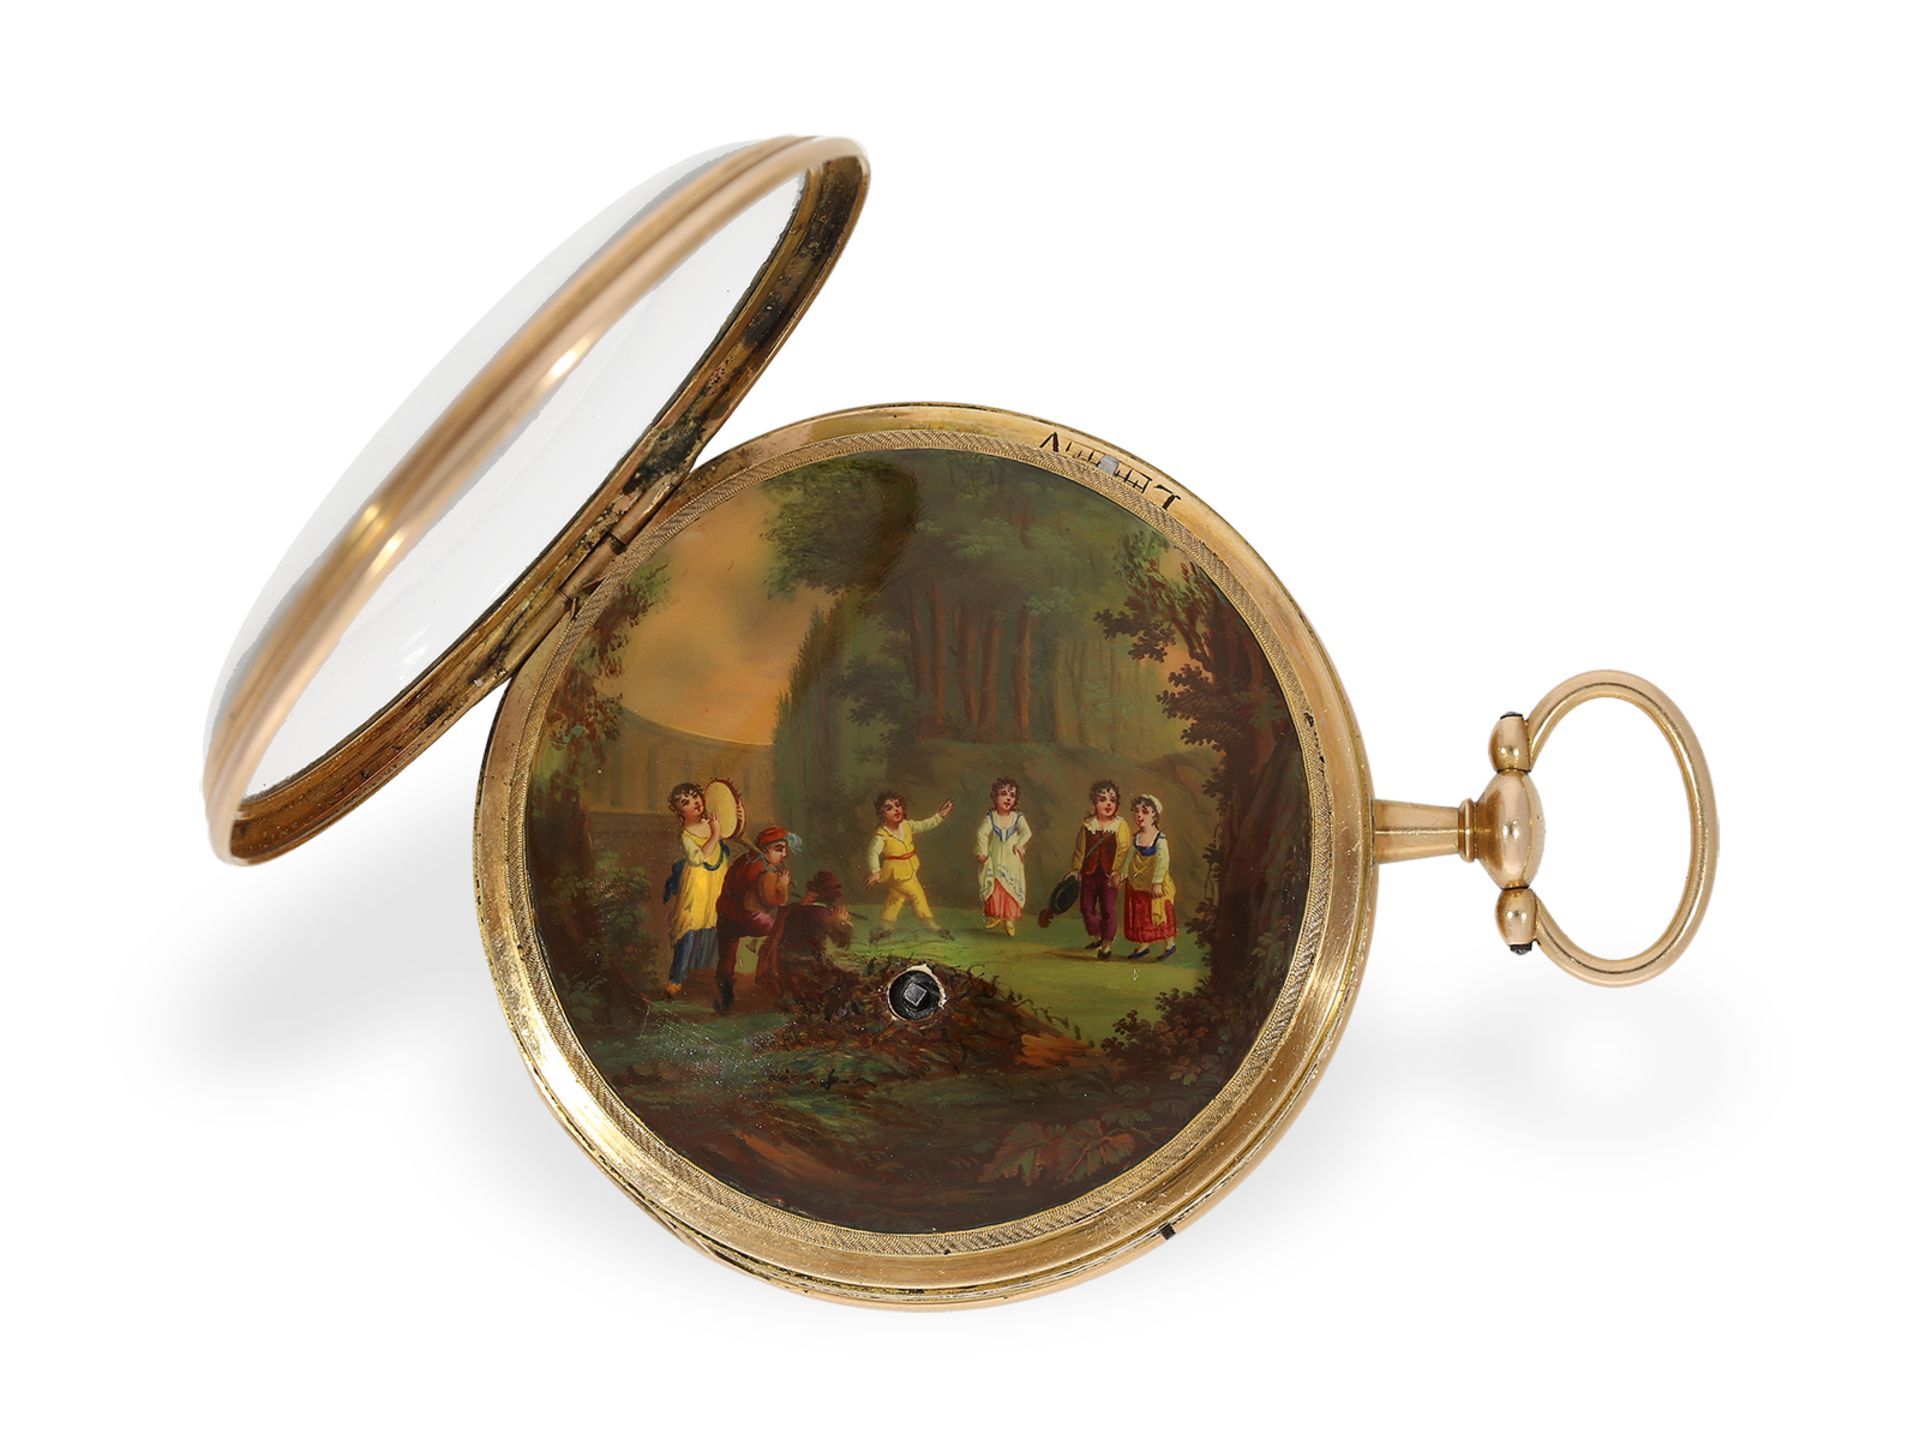 Pocket watch: large, unique gold/enamel pocket watch with musical movement, probably Geneva, ca. 180